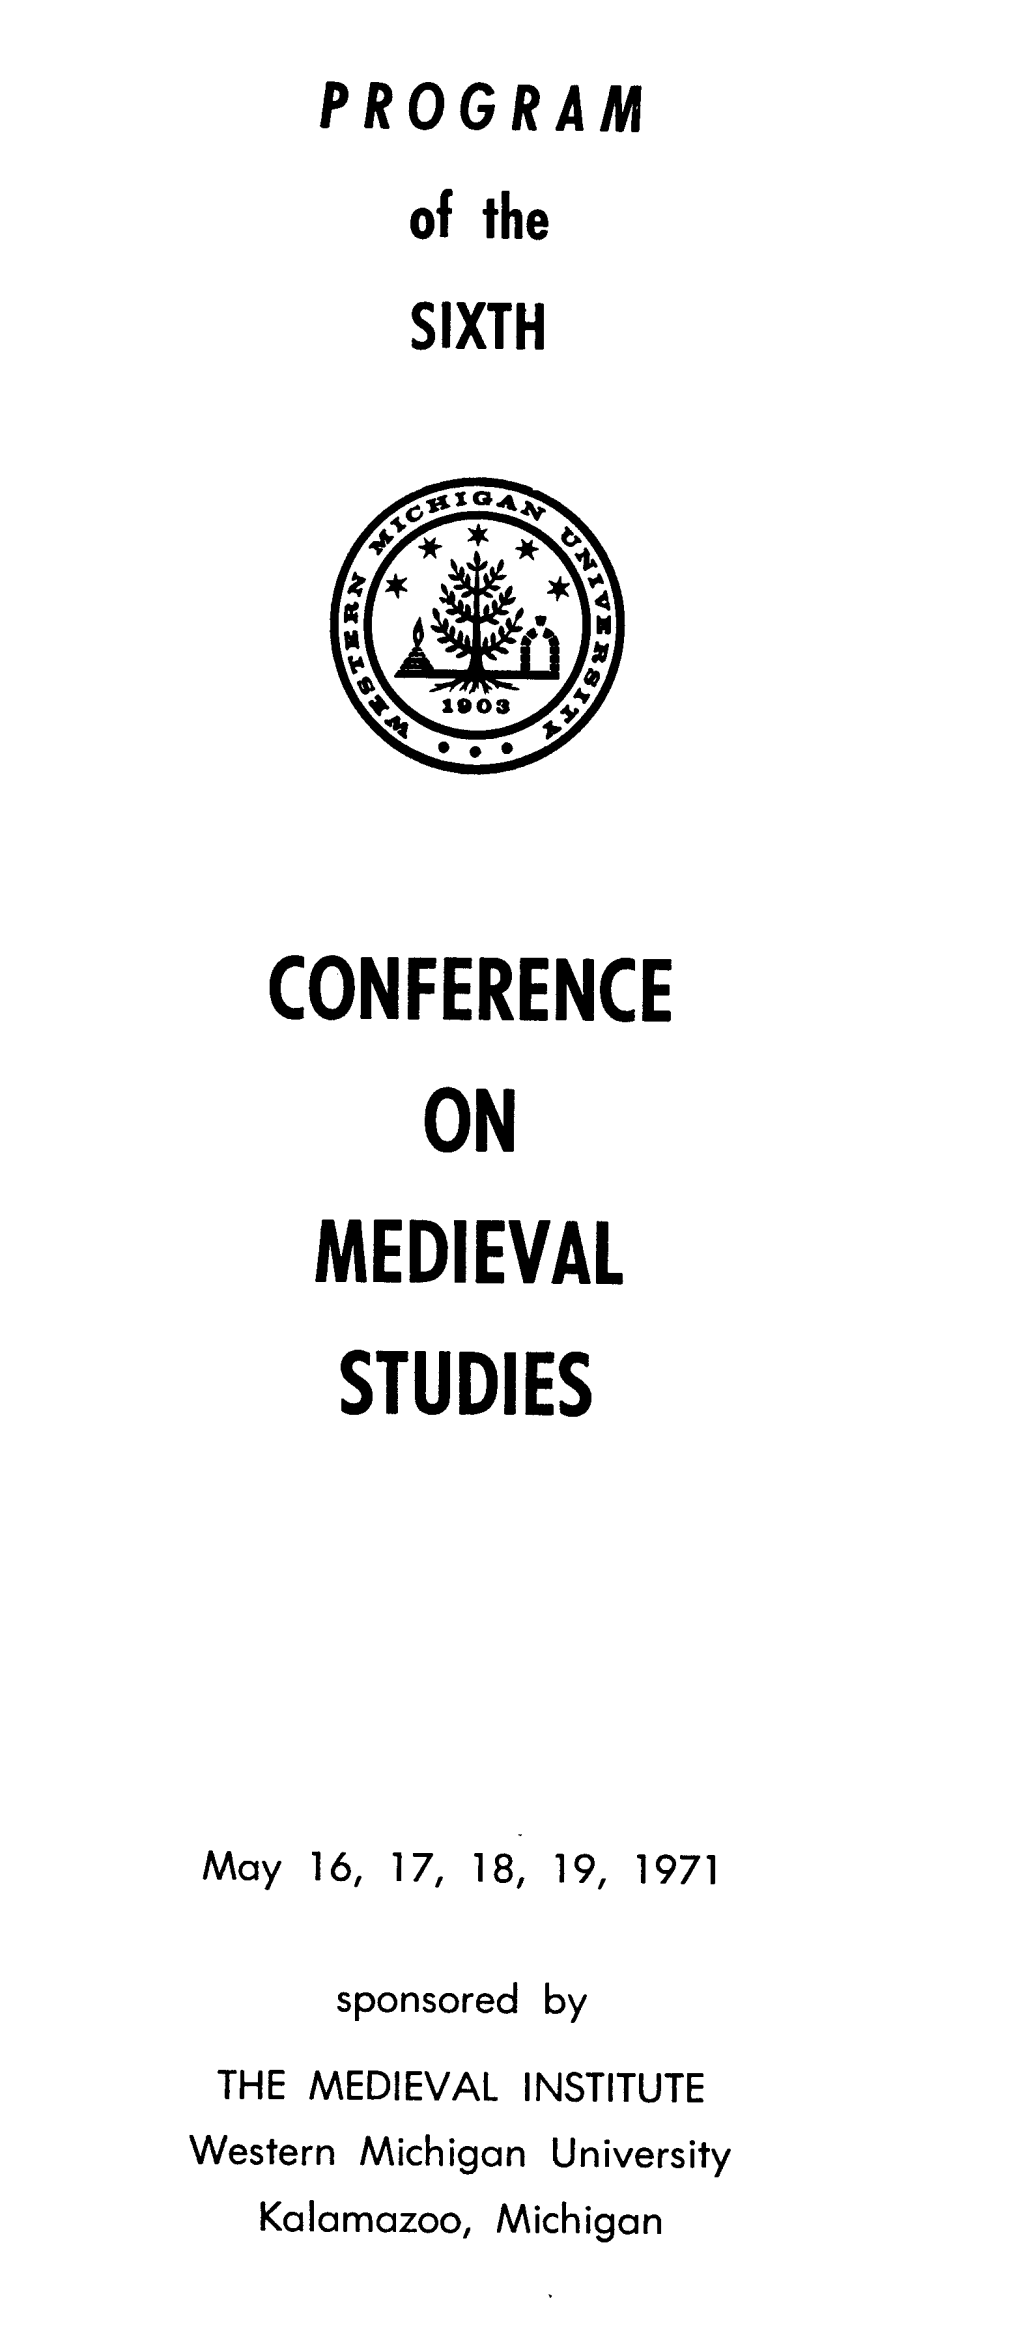 Sixth Conference on Medieval Studies Will Be Held in the University Center (Except the Two Evening Programs in Kanley Chapel) of Western Michigan University